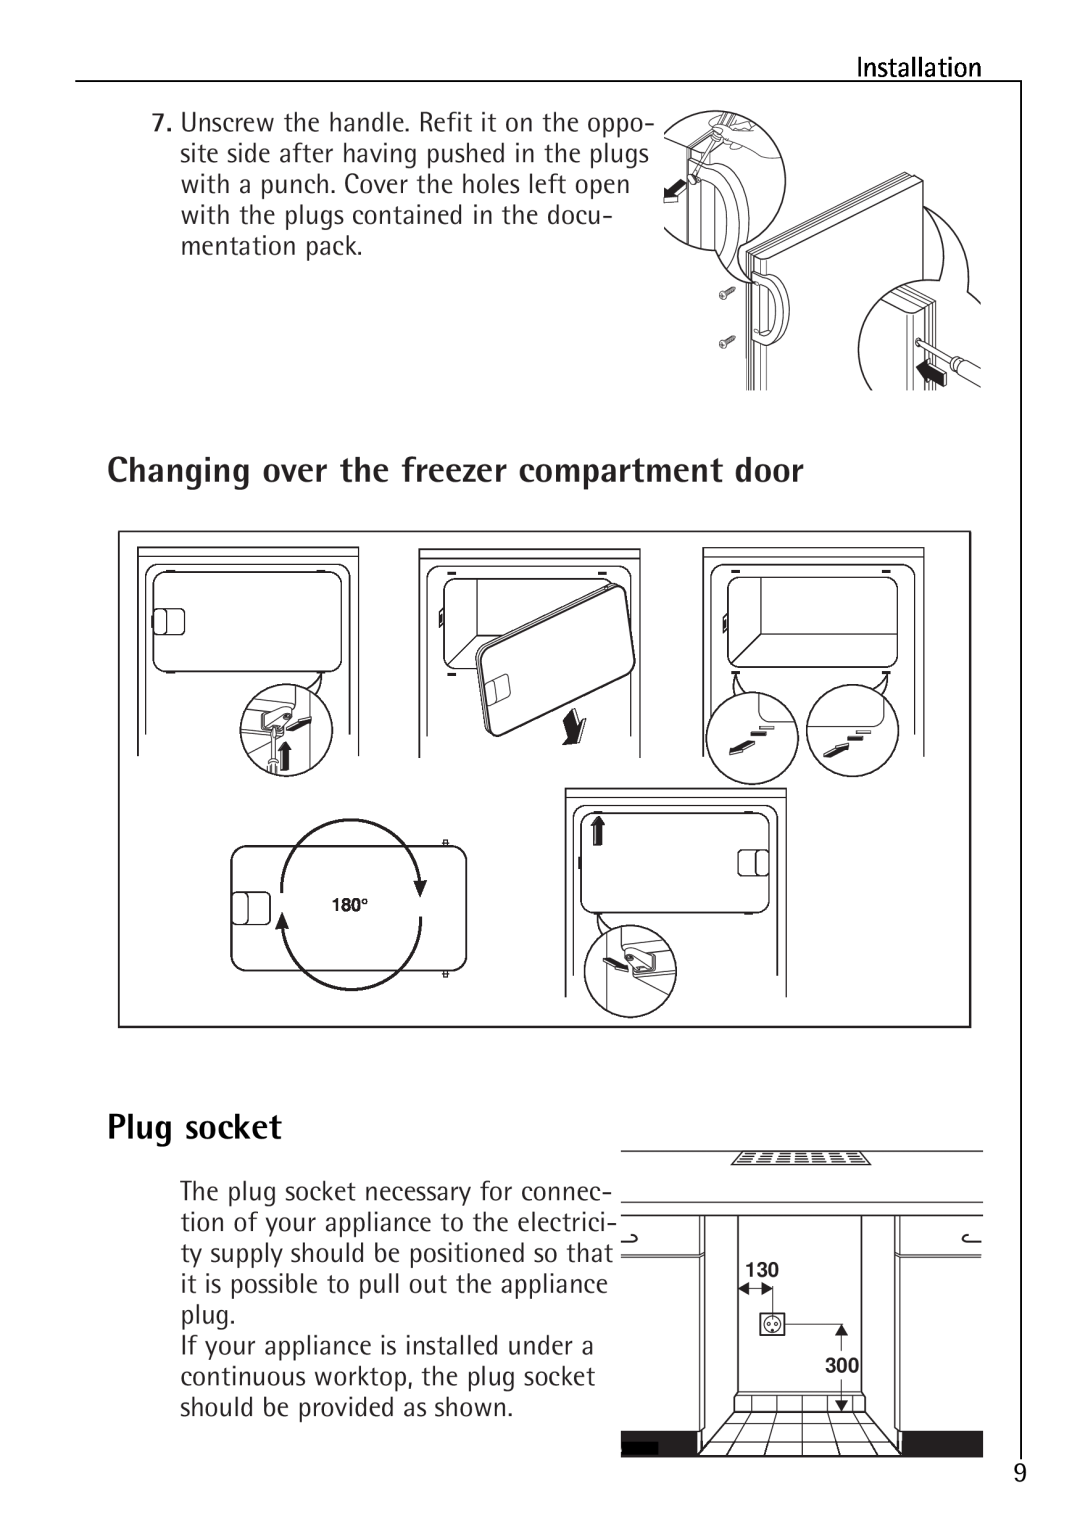 Electrolux 1583-8 TK Changing over the freezer compartment door, Plug socket, If your appliance is installed under a 